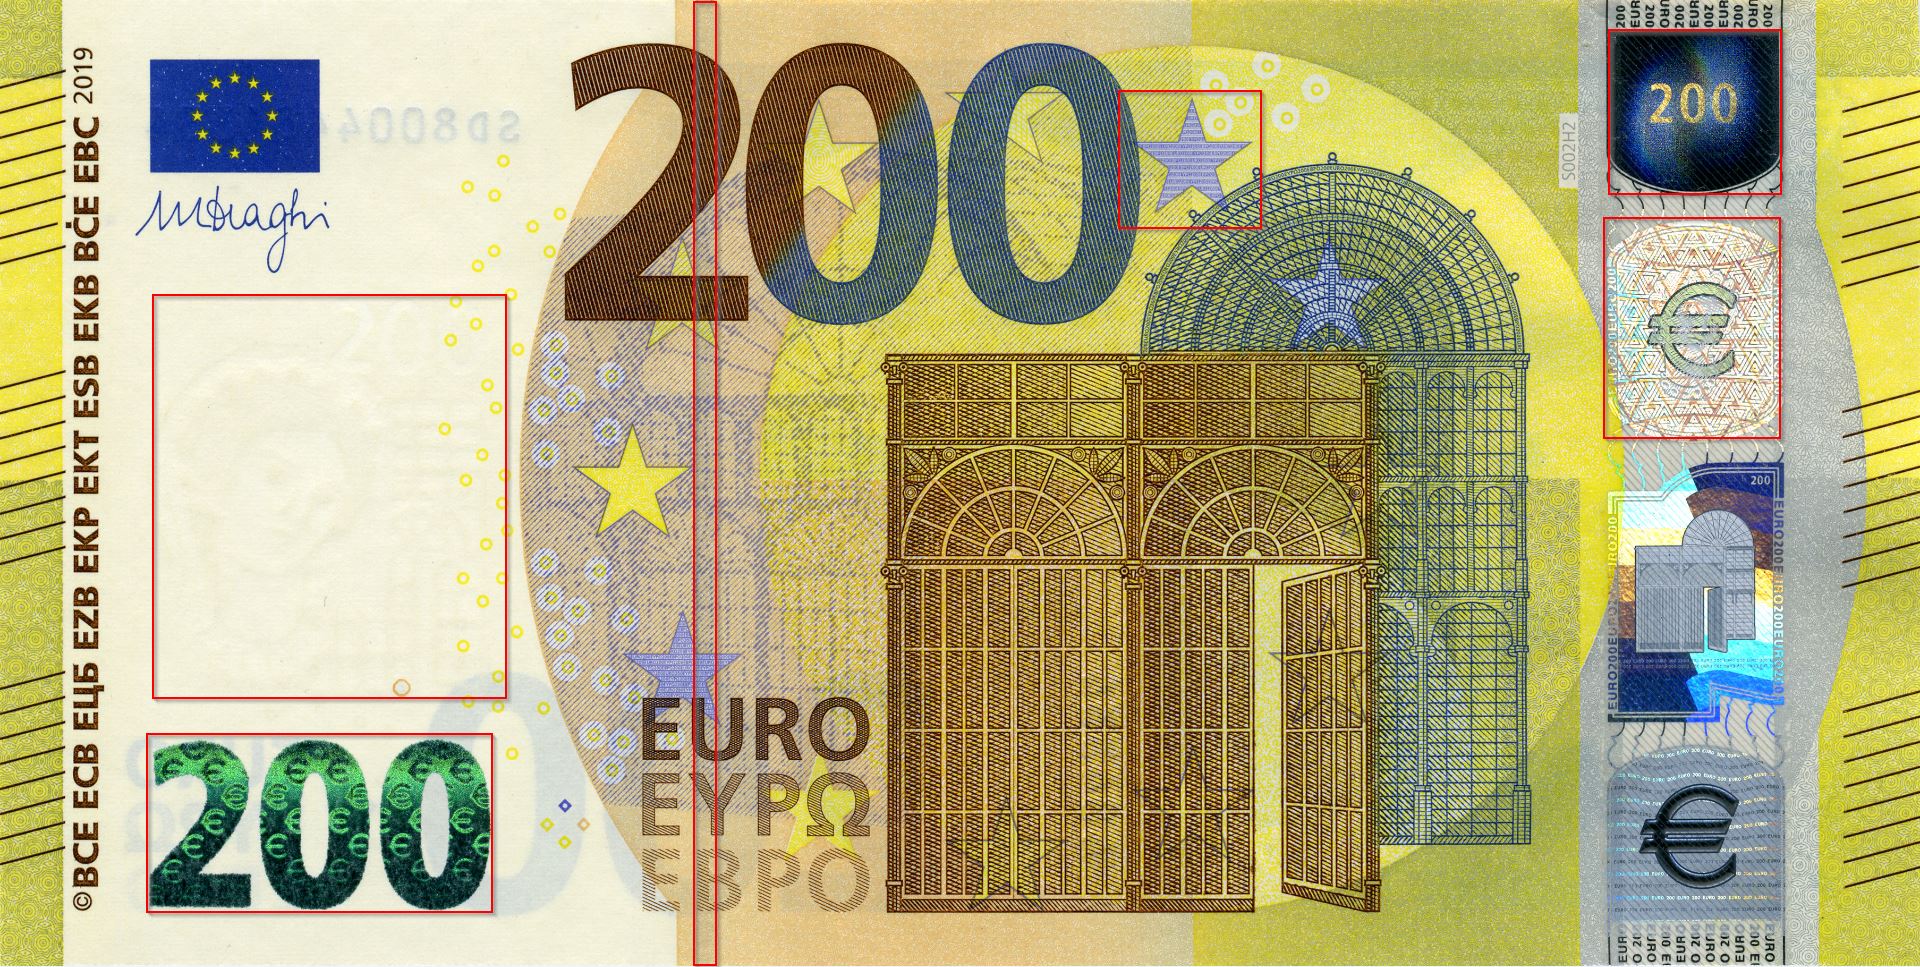 200 euro banknote Europa series - front side